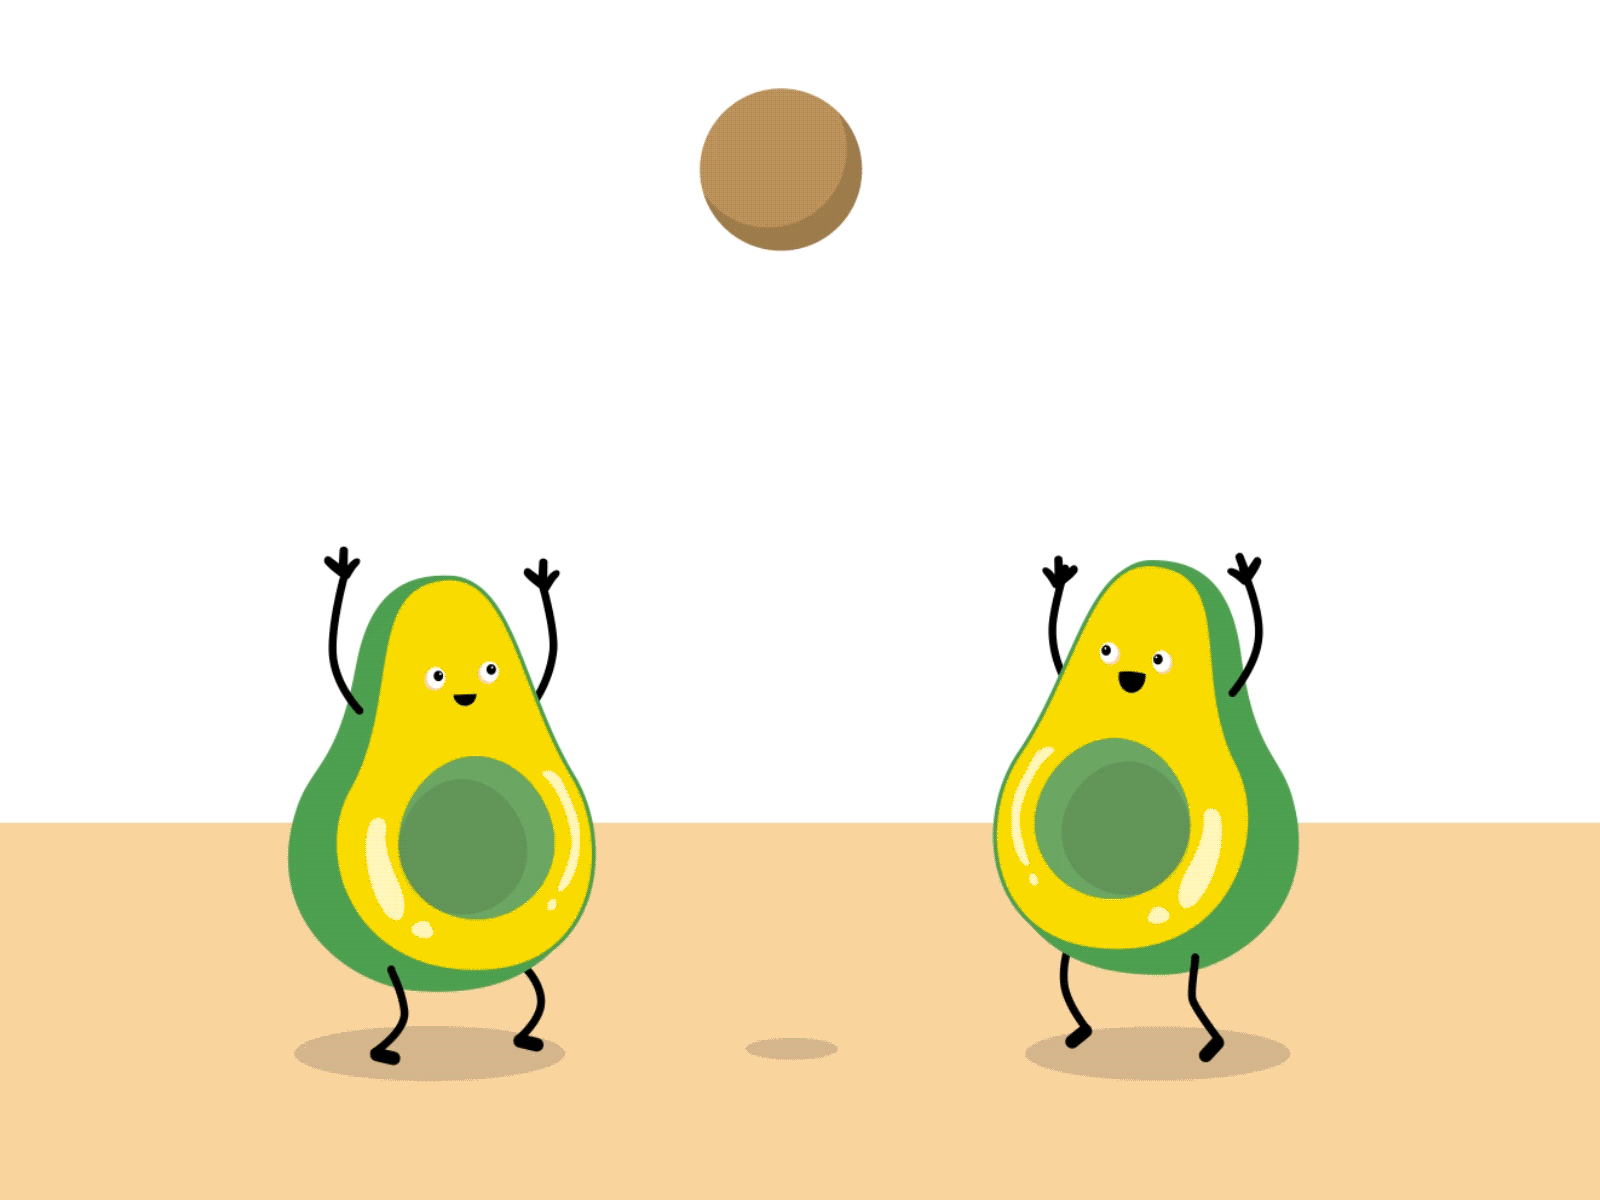 Always keep your avocado game strong! 2d aftereffects animated gif animation avocado ball cute game green halves pair slowmotion team logo